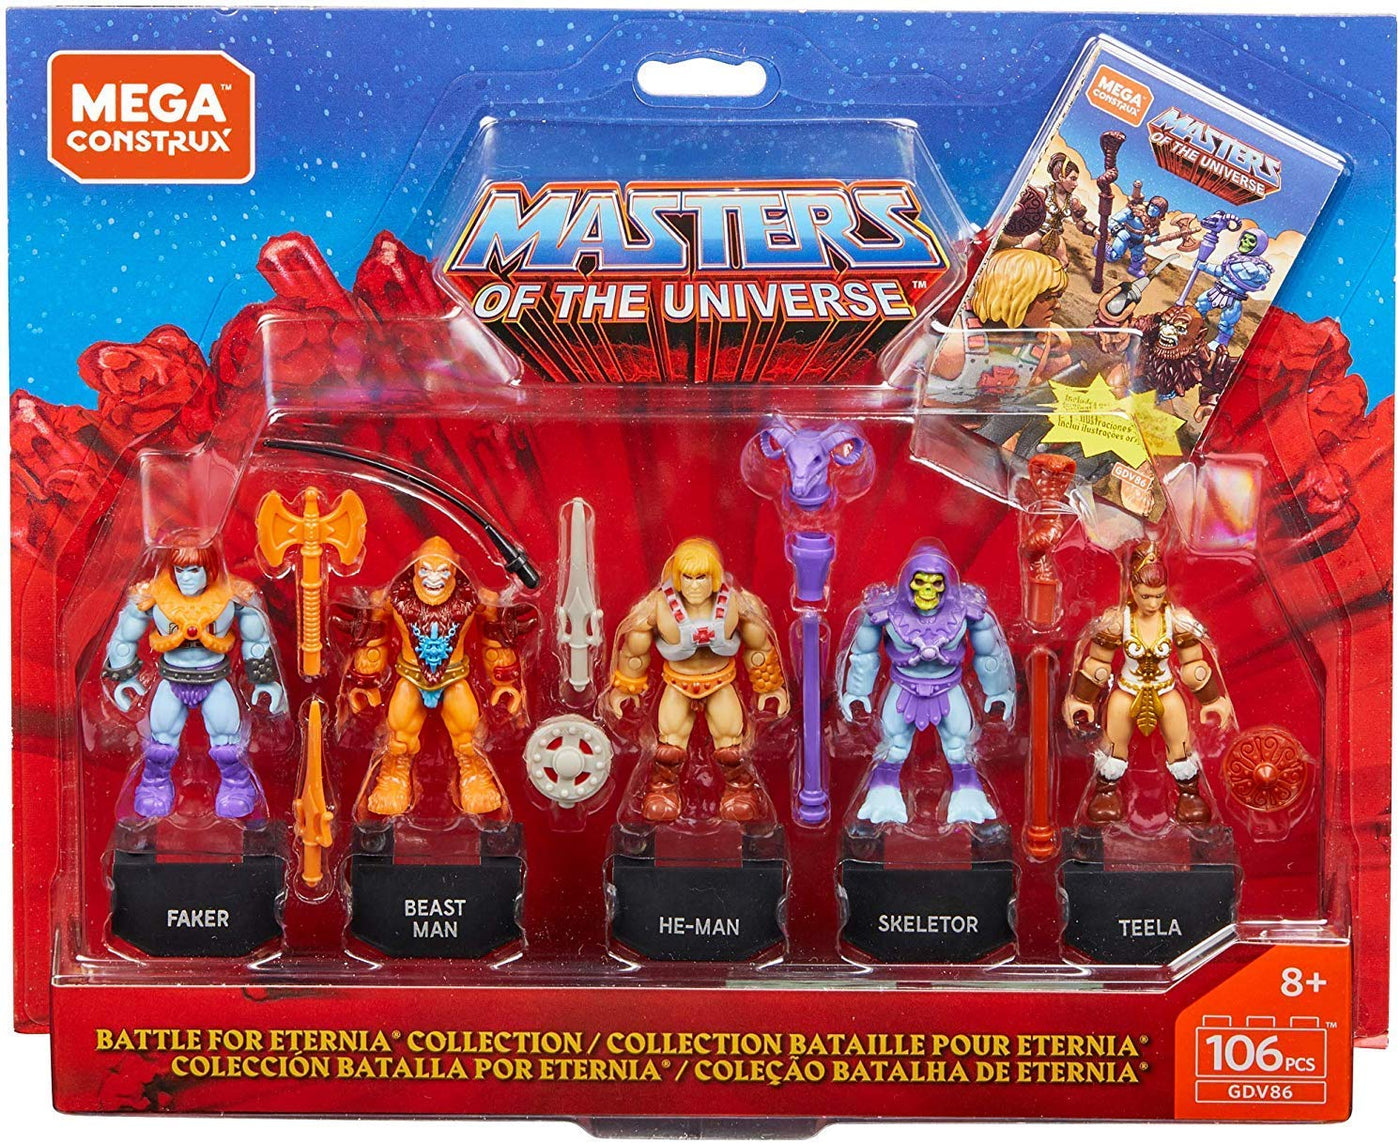 Battle For Eternia Mega Construx Masters Of The Universe 5 Pack The Brick Show Shop